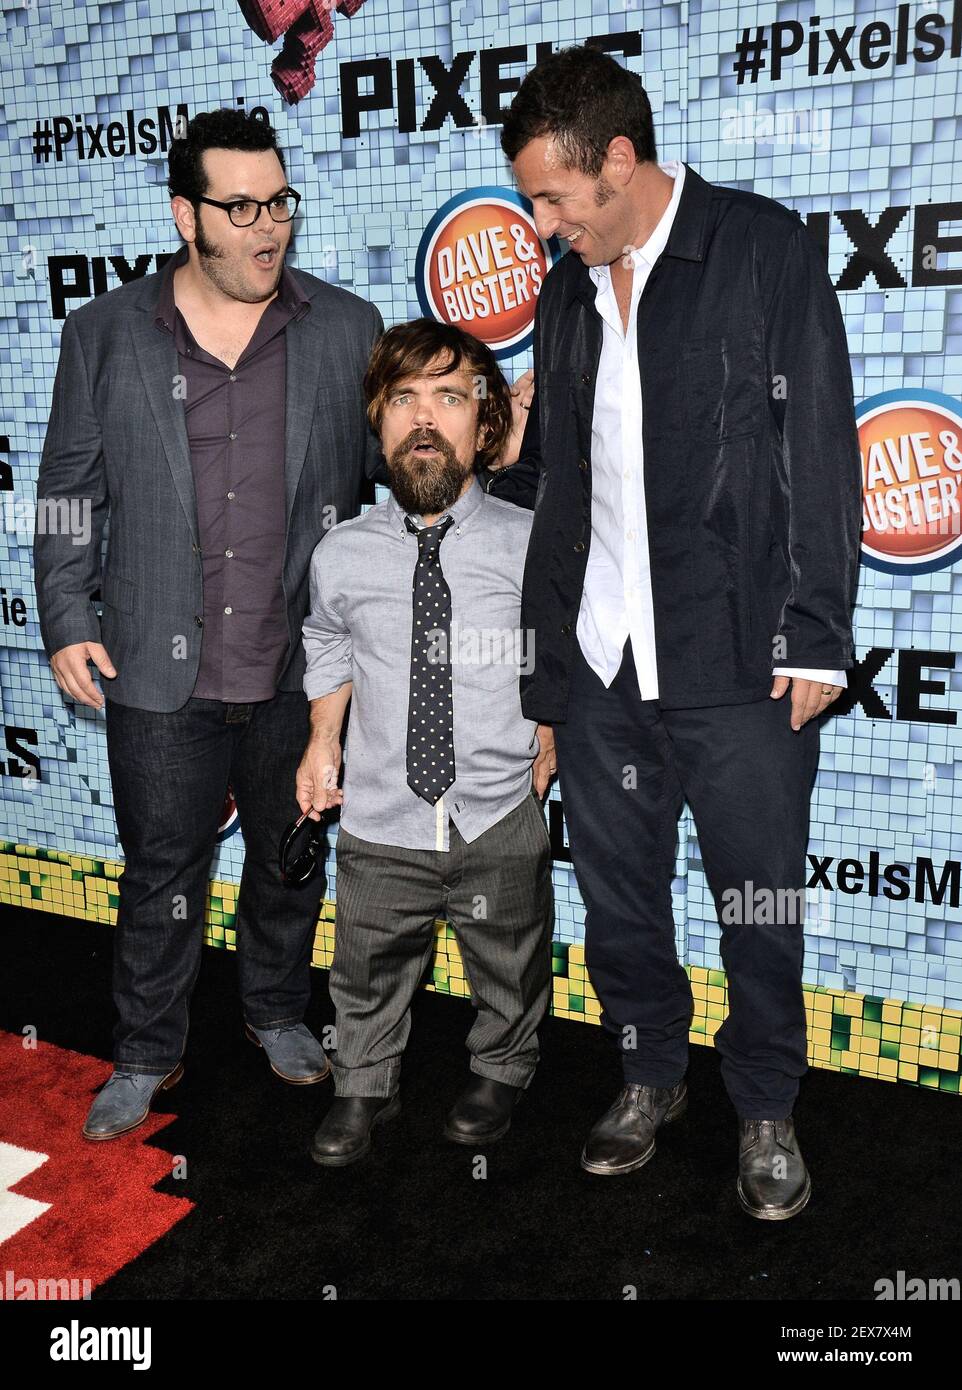 josh Gad Peter Dinklage And Adam Sandler Attends The New York Premiere Of Pixels Please Use Credit From Credit Field Stock Photo Alamy